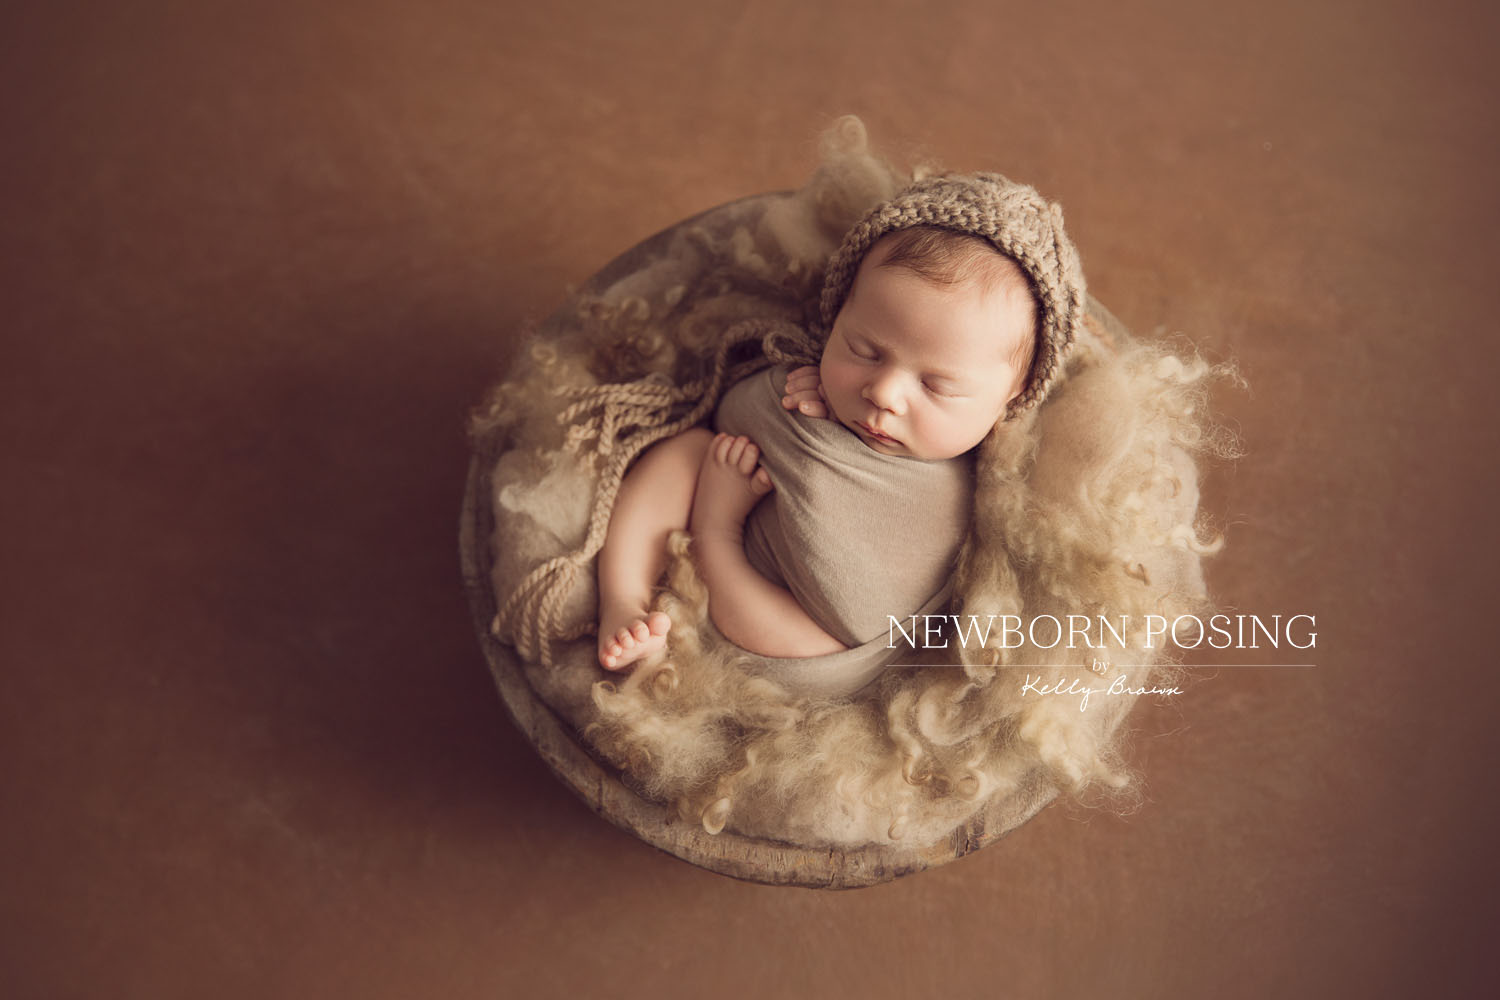 Newborn photography of baby in a prop